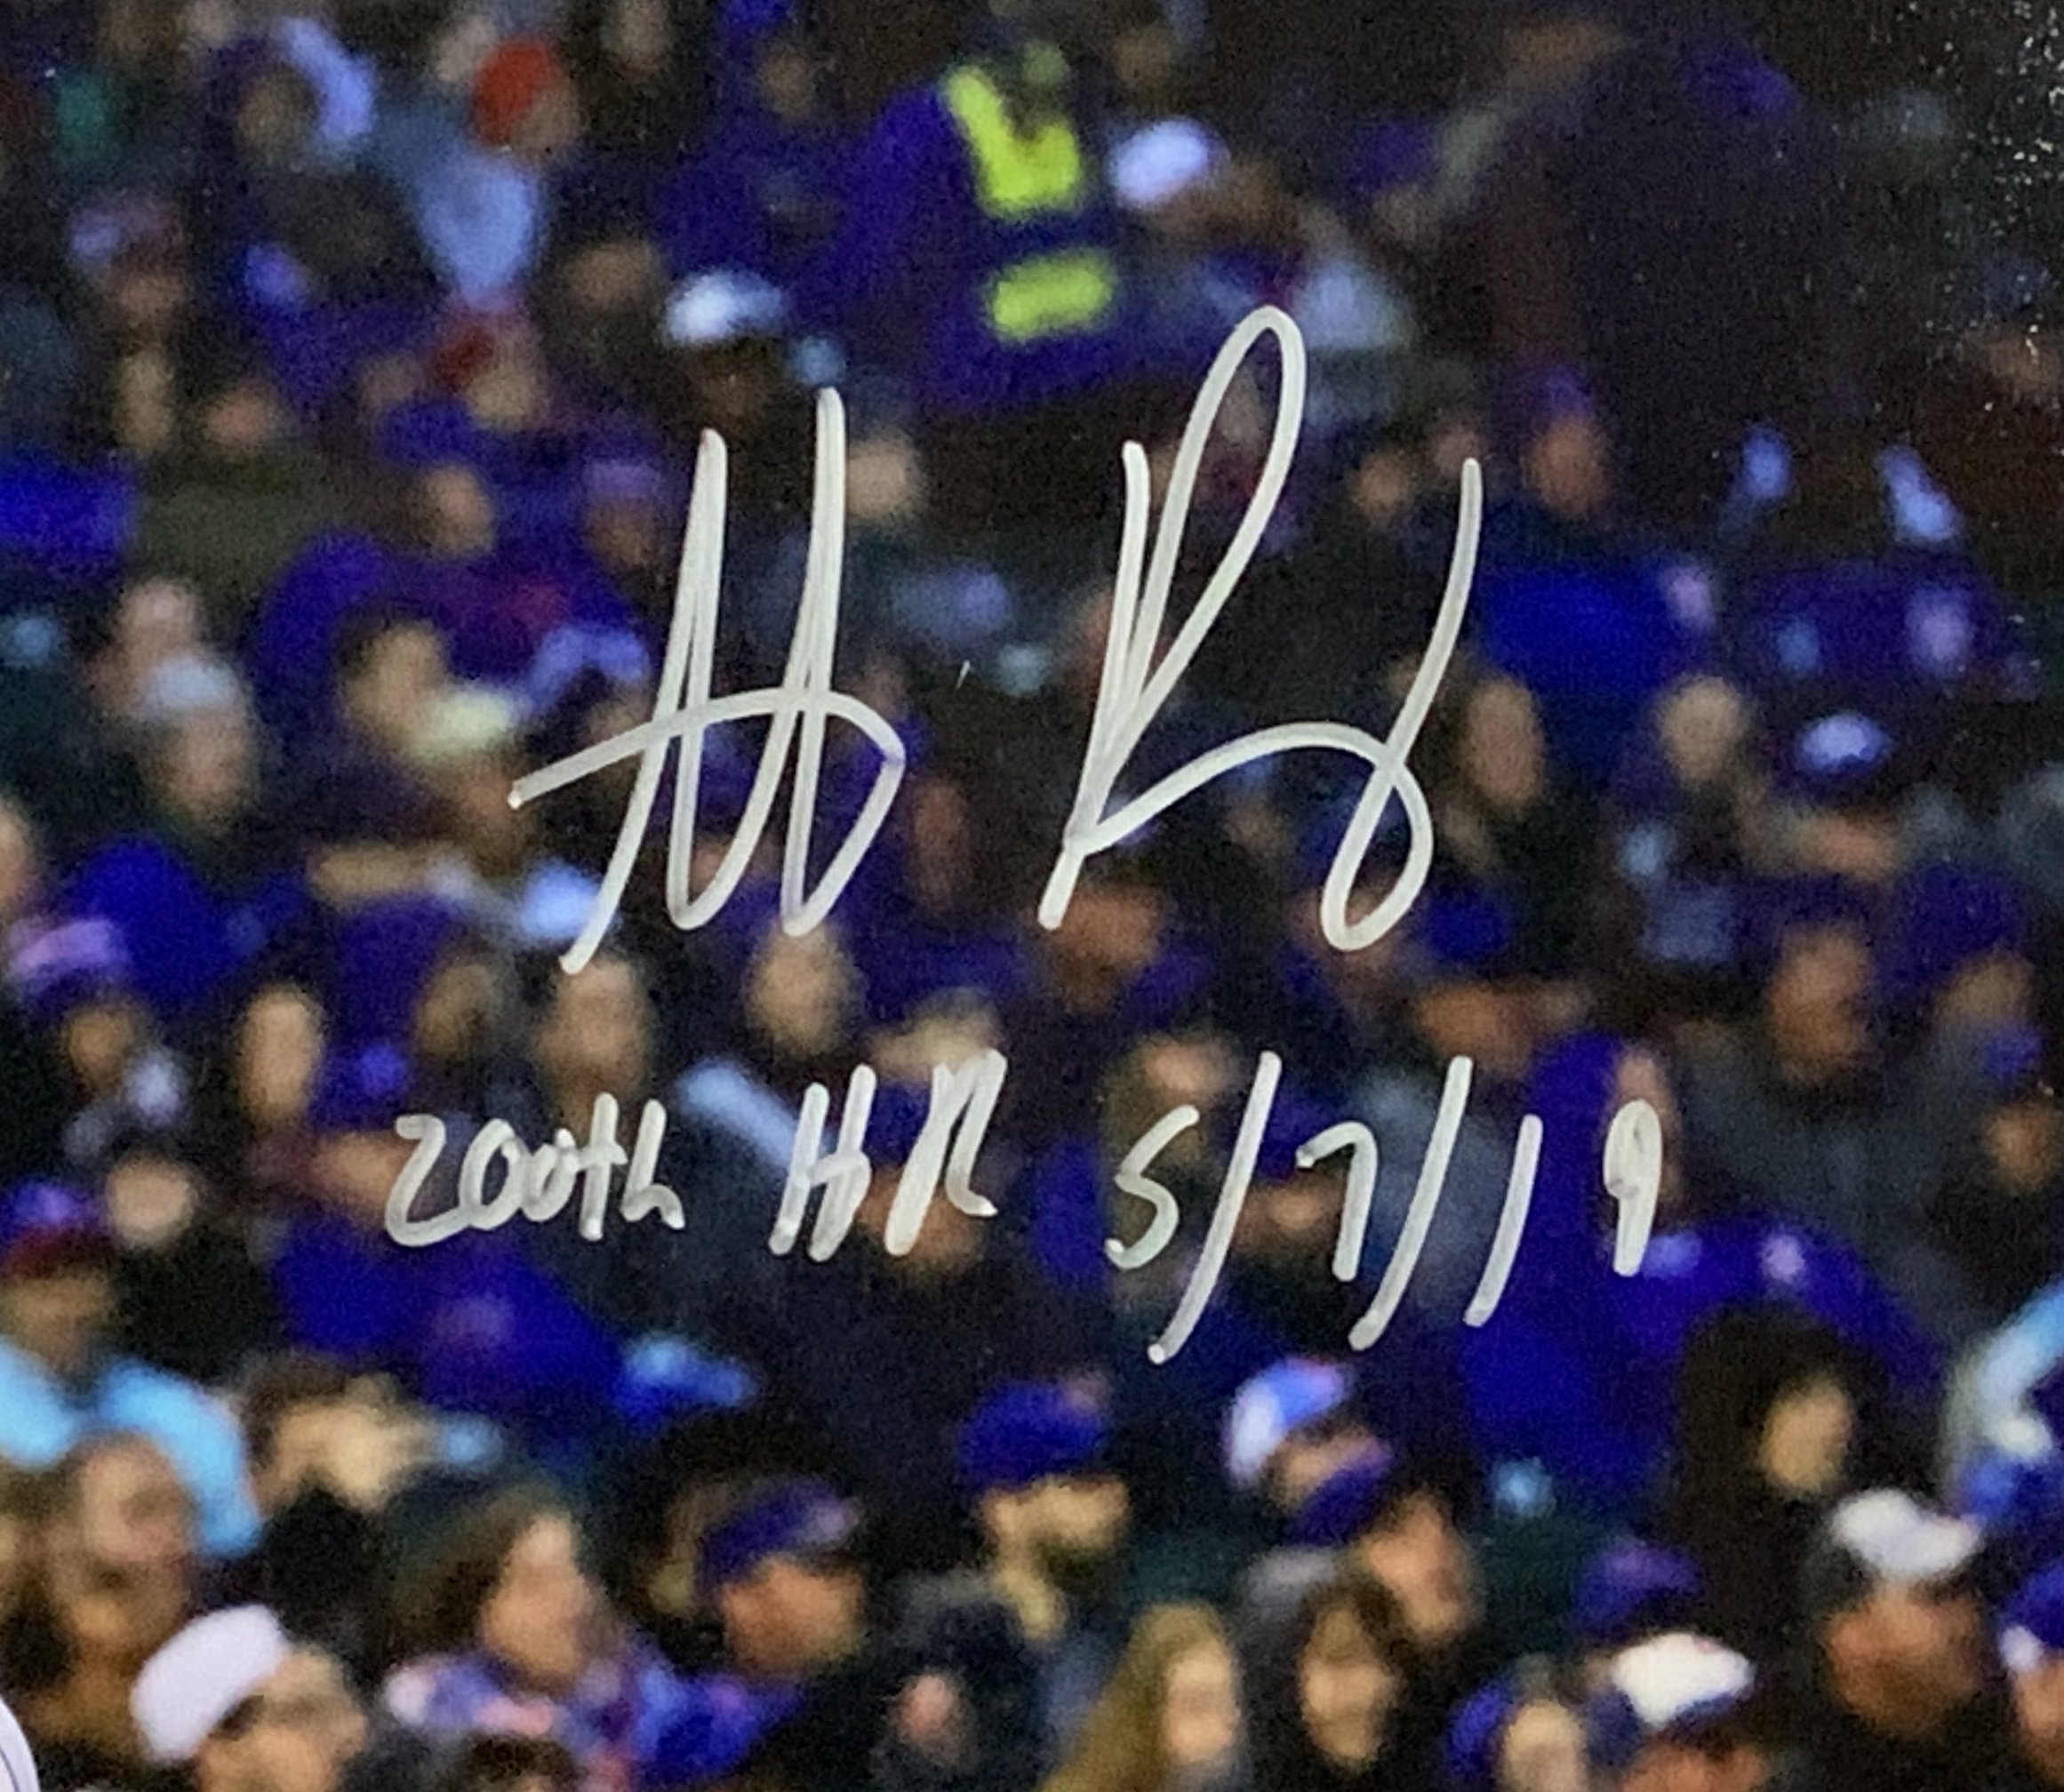 Anthony Rizzo Signed Photo 16x20 Cubs 200TH HR 1/16 Baseball